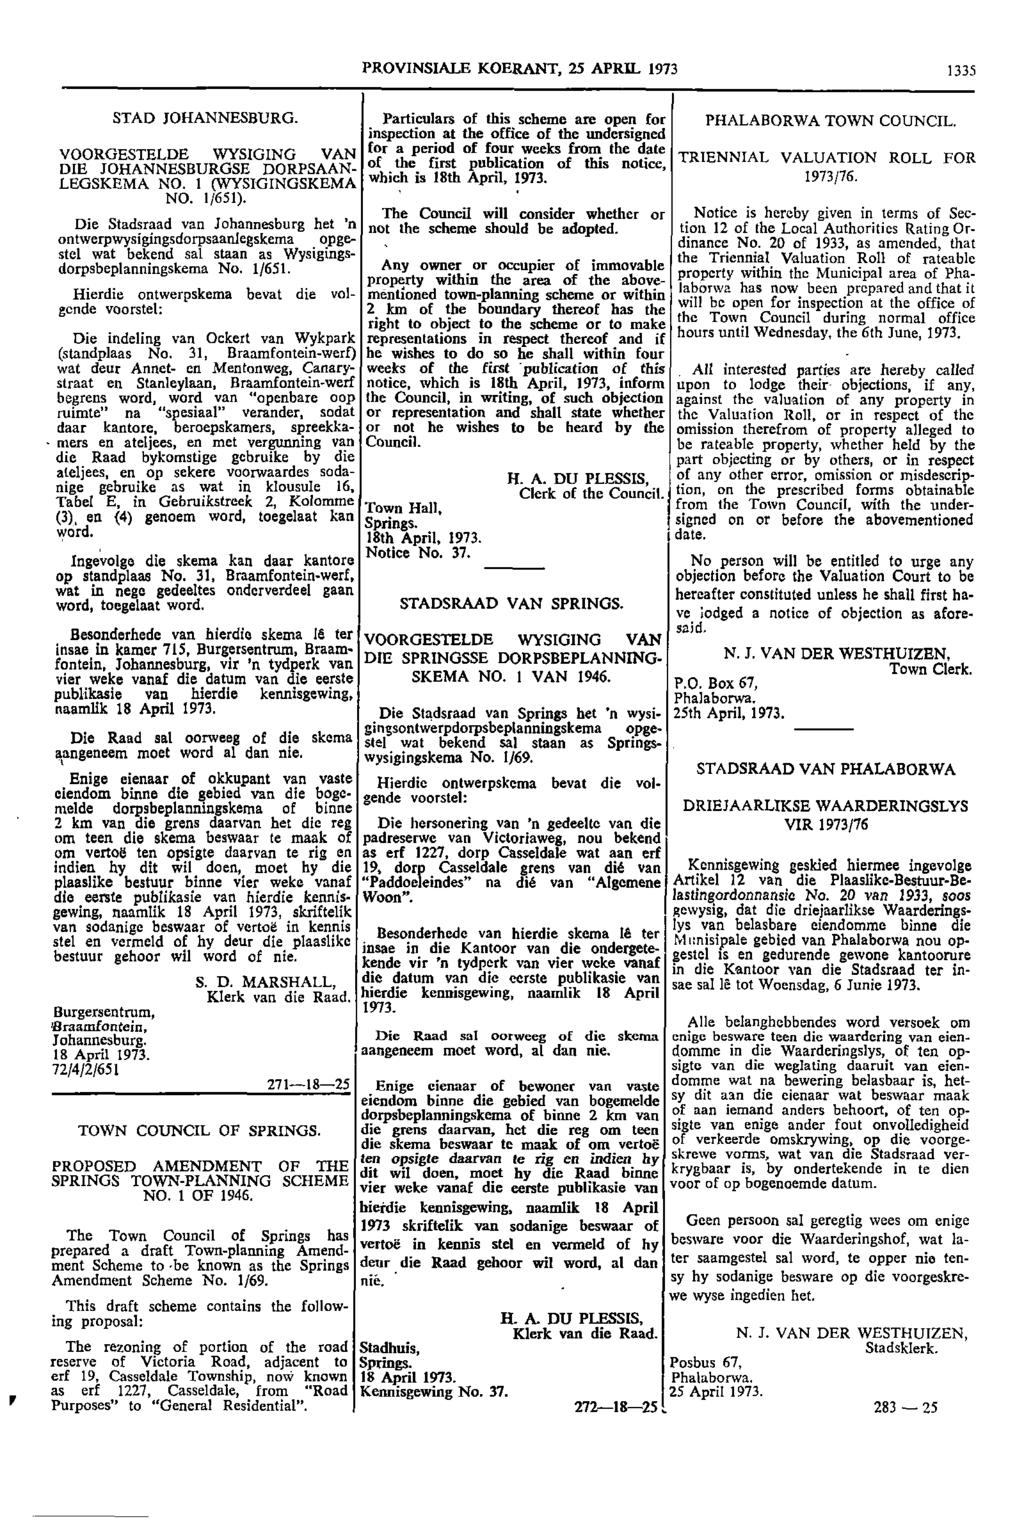 PROVINSIALE KOERANT 25 APRIL 1973 1335 STAD JOHANNESBURG Particulars of this scheme are open for PHALABORWA TOWN COUNCIL inspection at the office of the undersigned for a VOORGESTELDE WYSIGING VAN